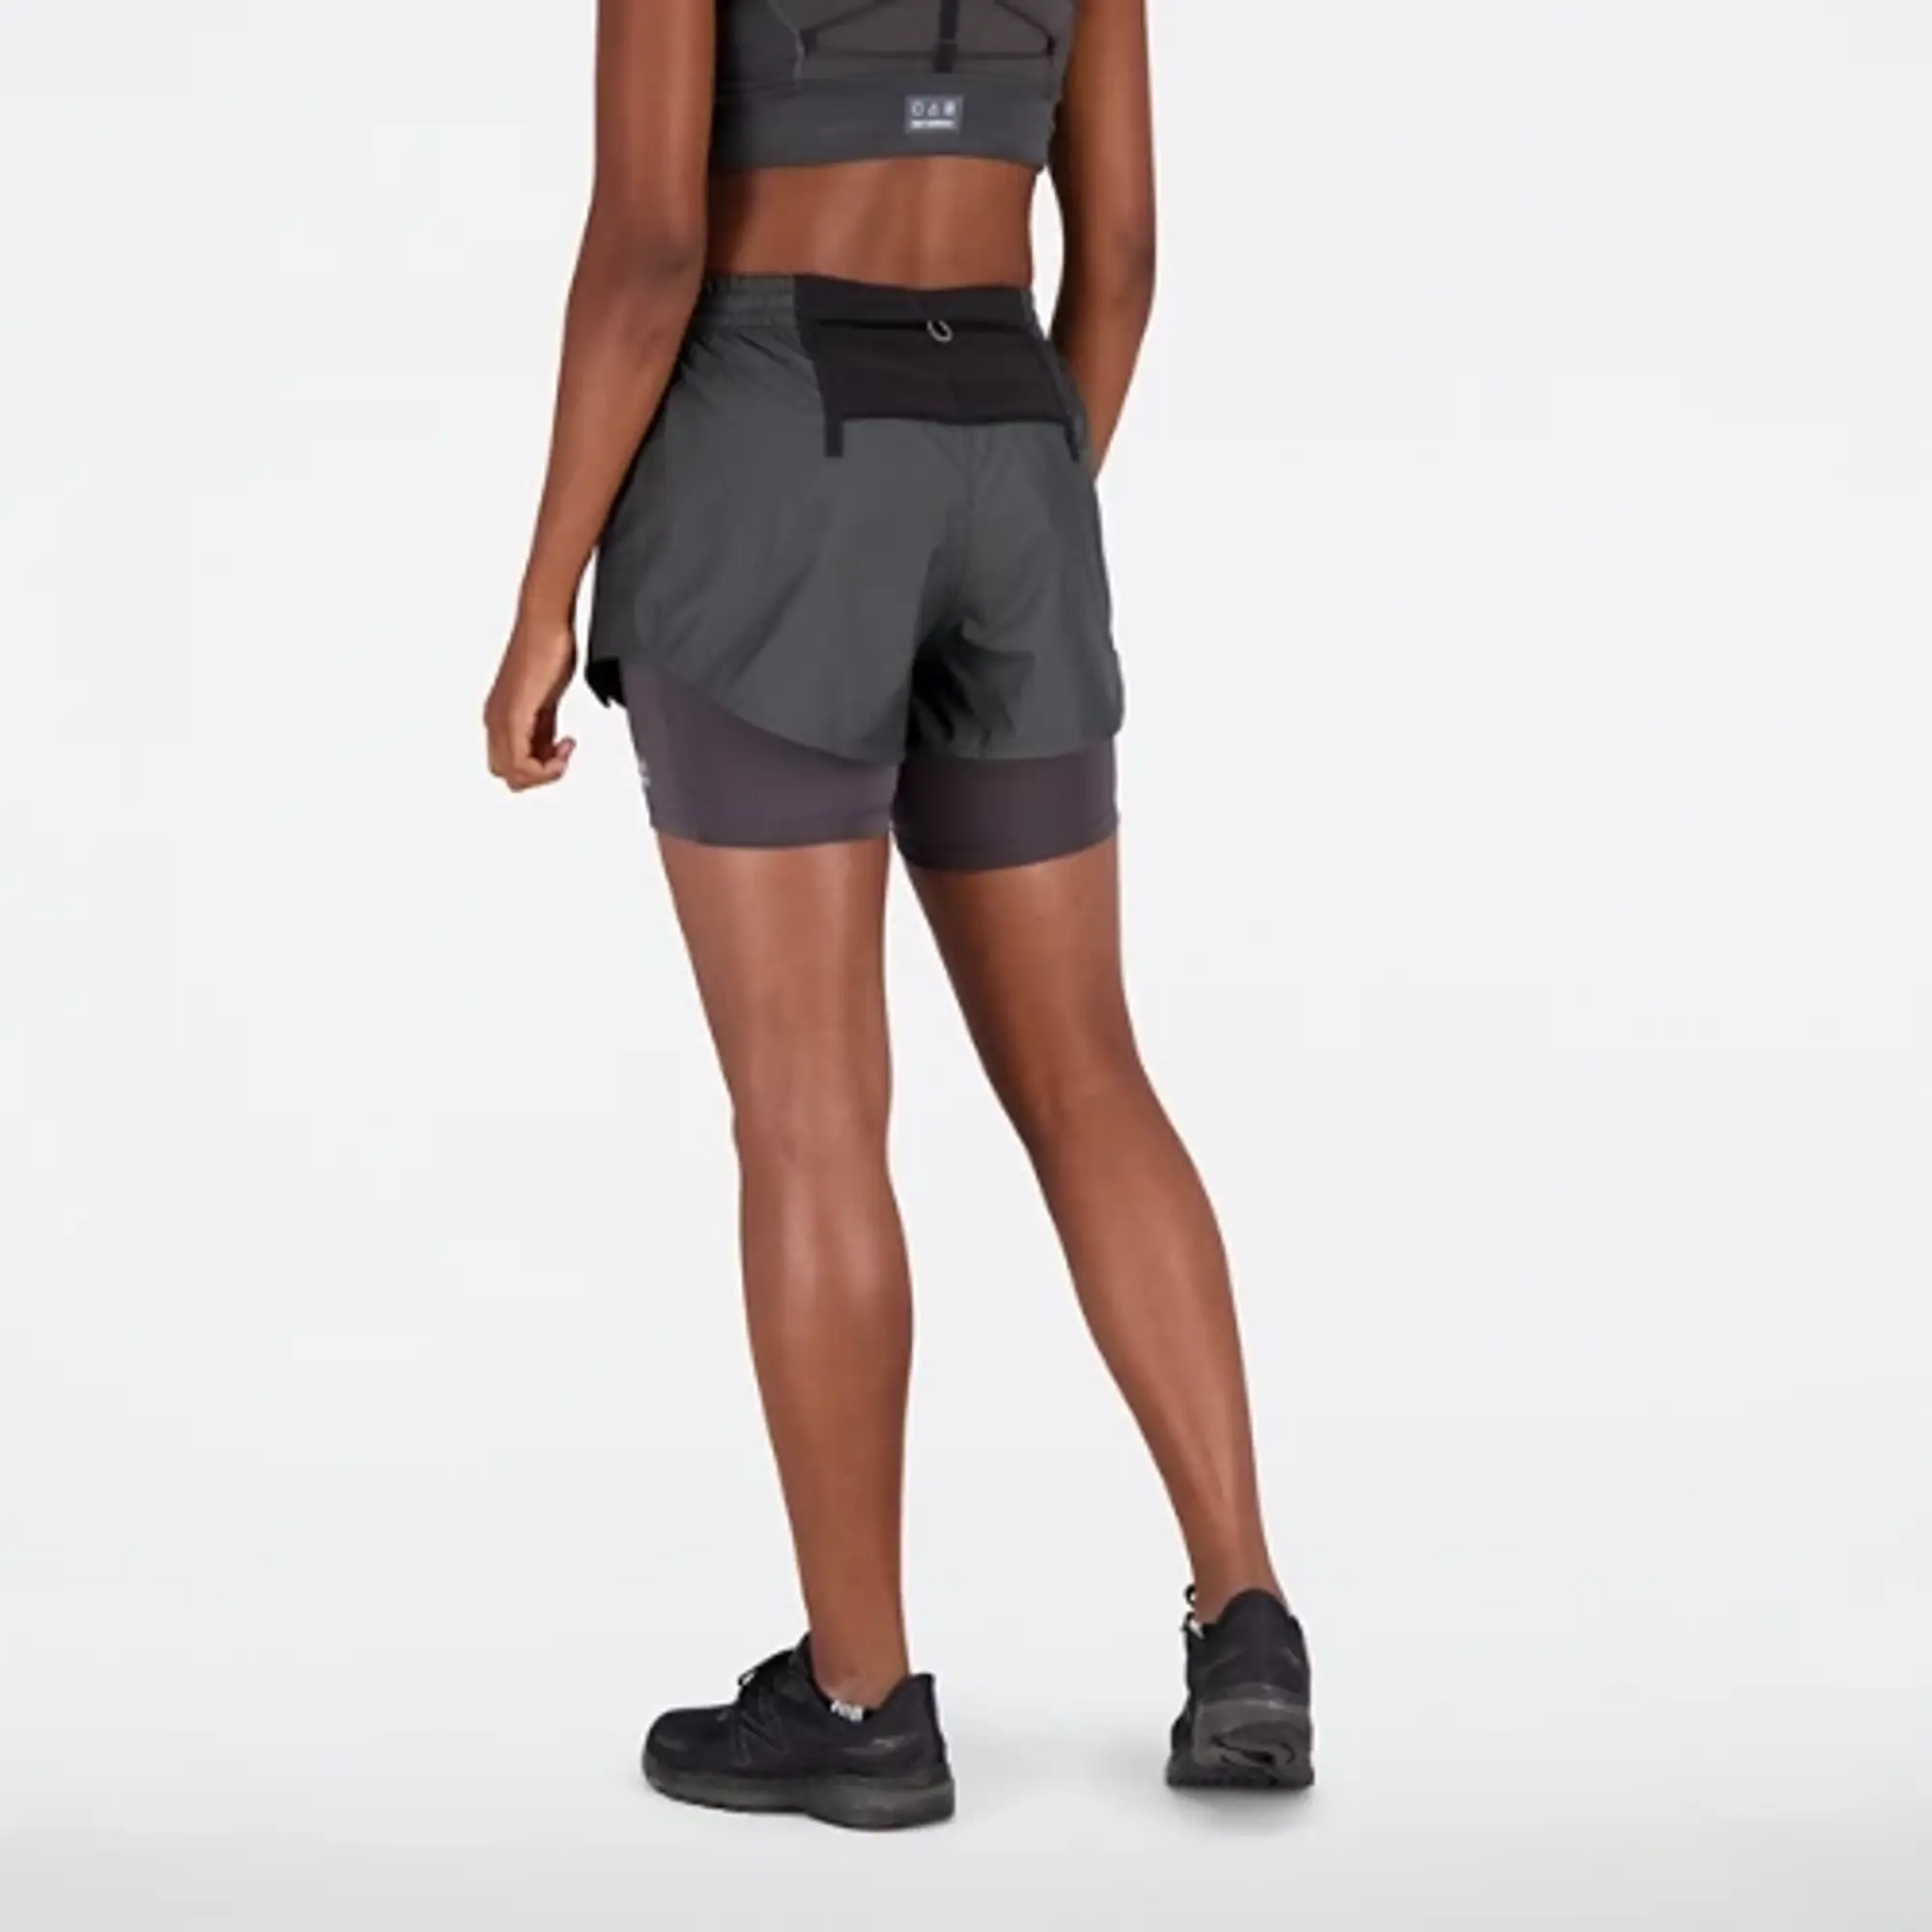 New Balance Women's Impact Run AT 3 Inch 2-in-1 Short in Black Polywoven